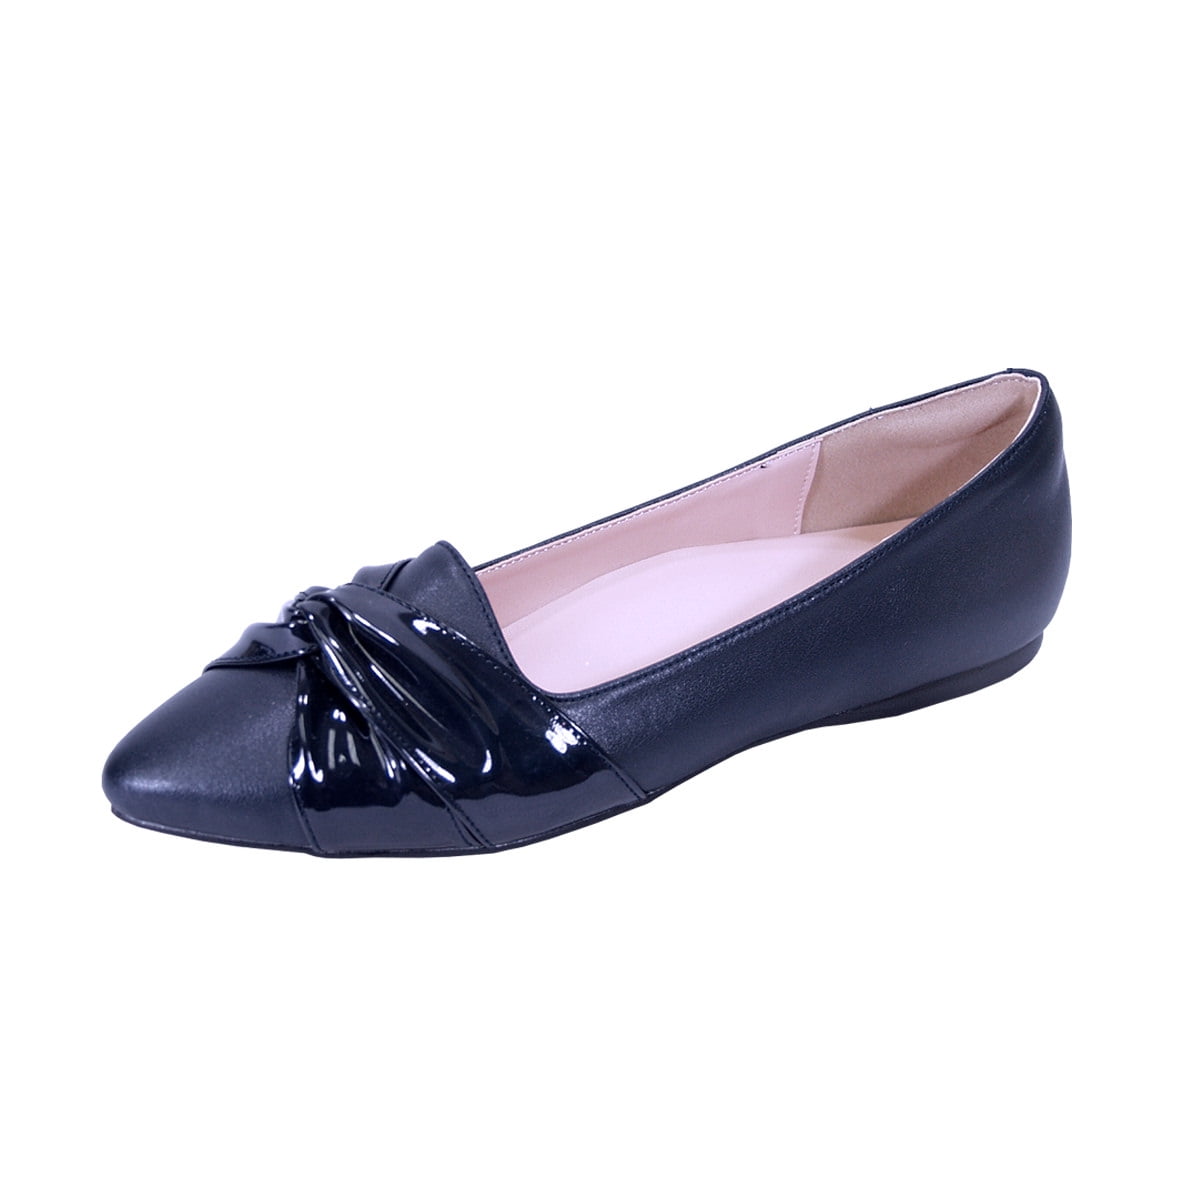 Ballet Flats Patent Leather Pointed Toe Slip On Closed Toe Women Shoes Navy 